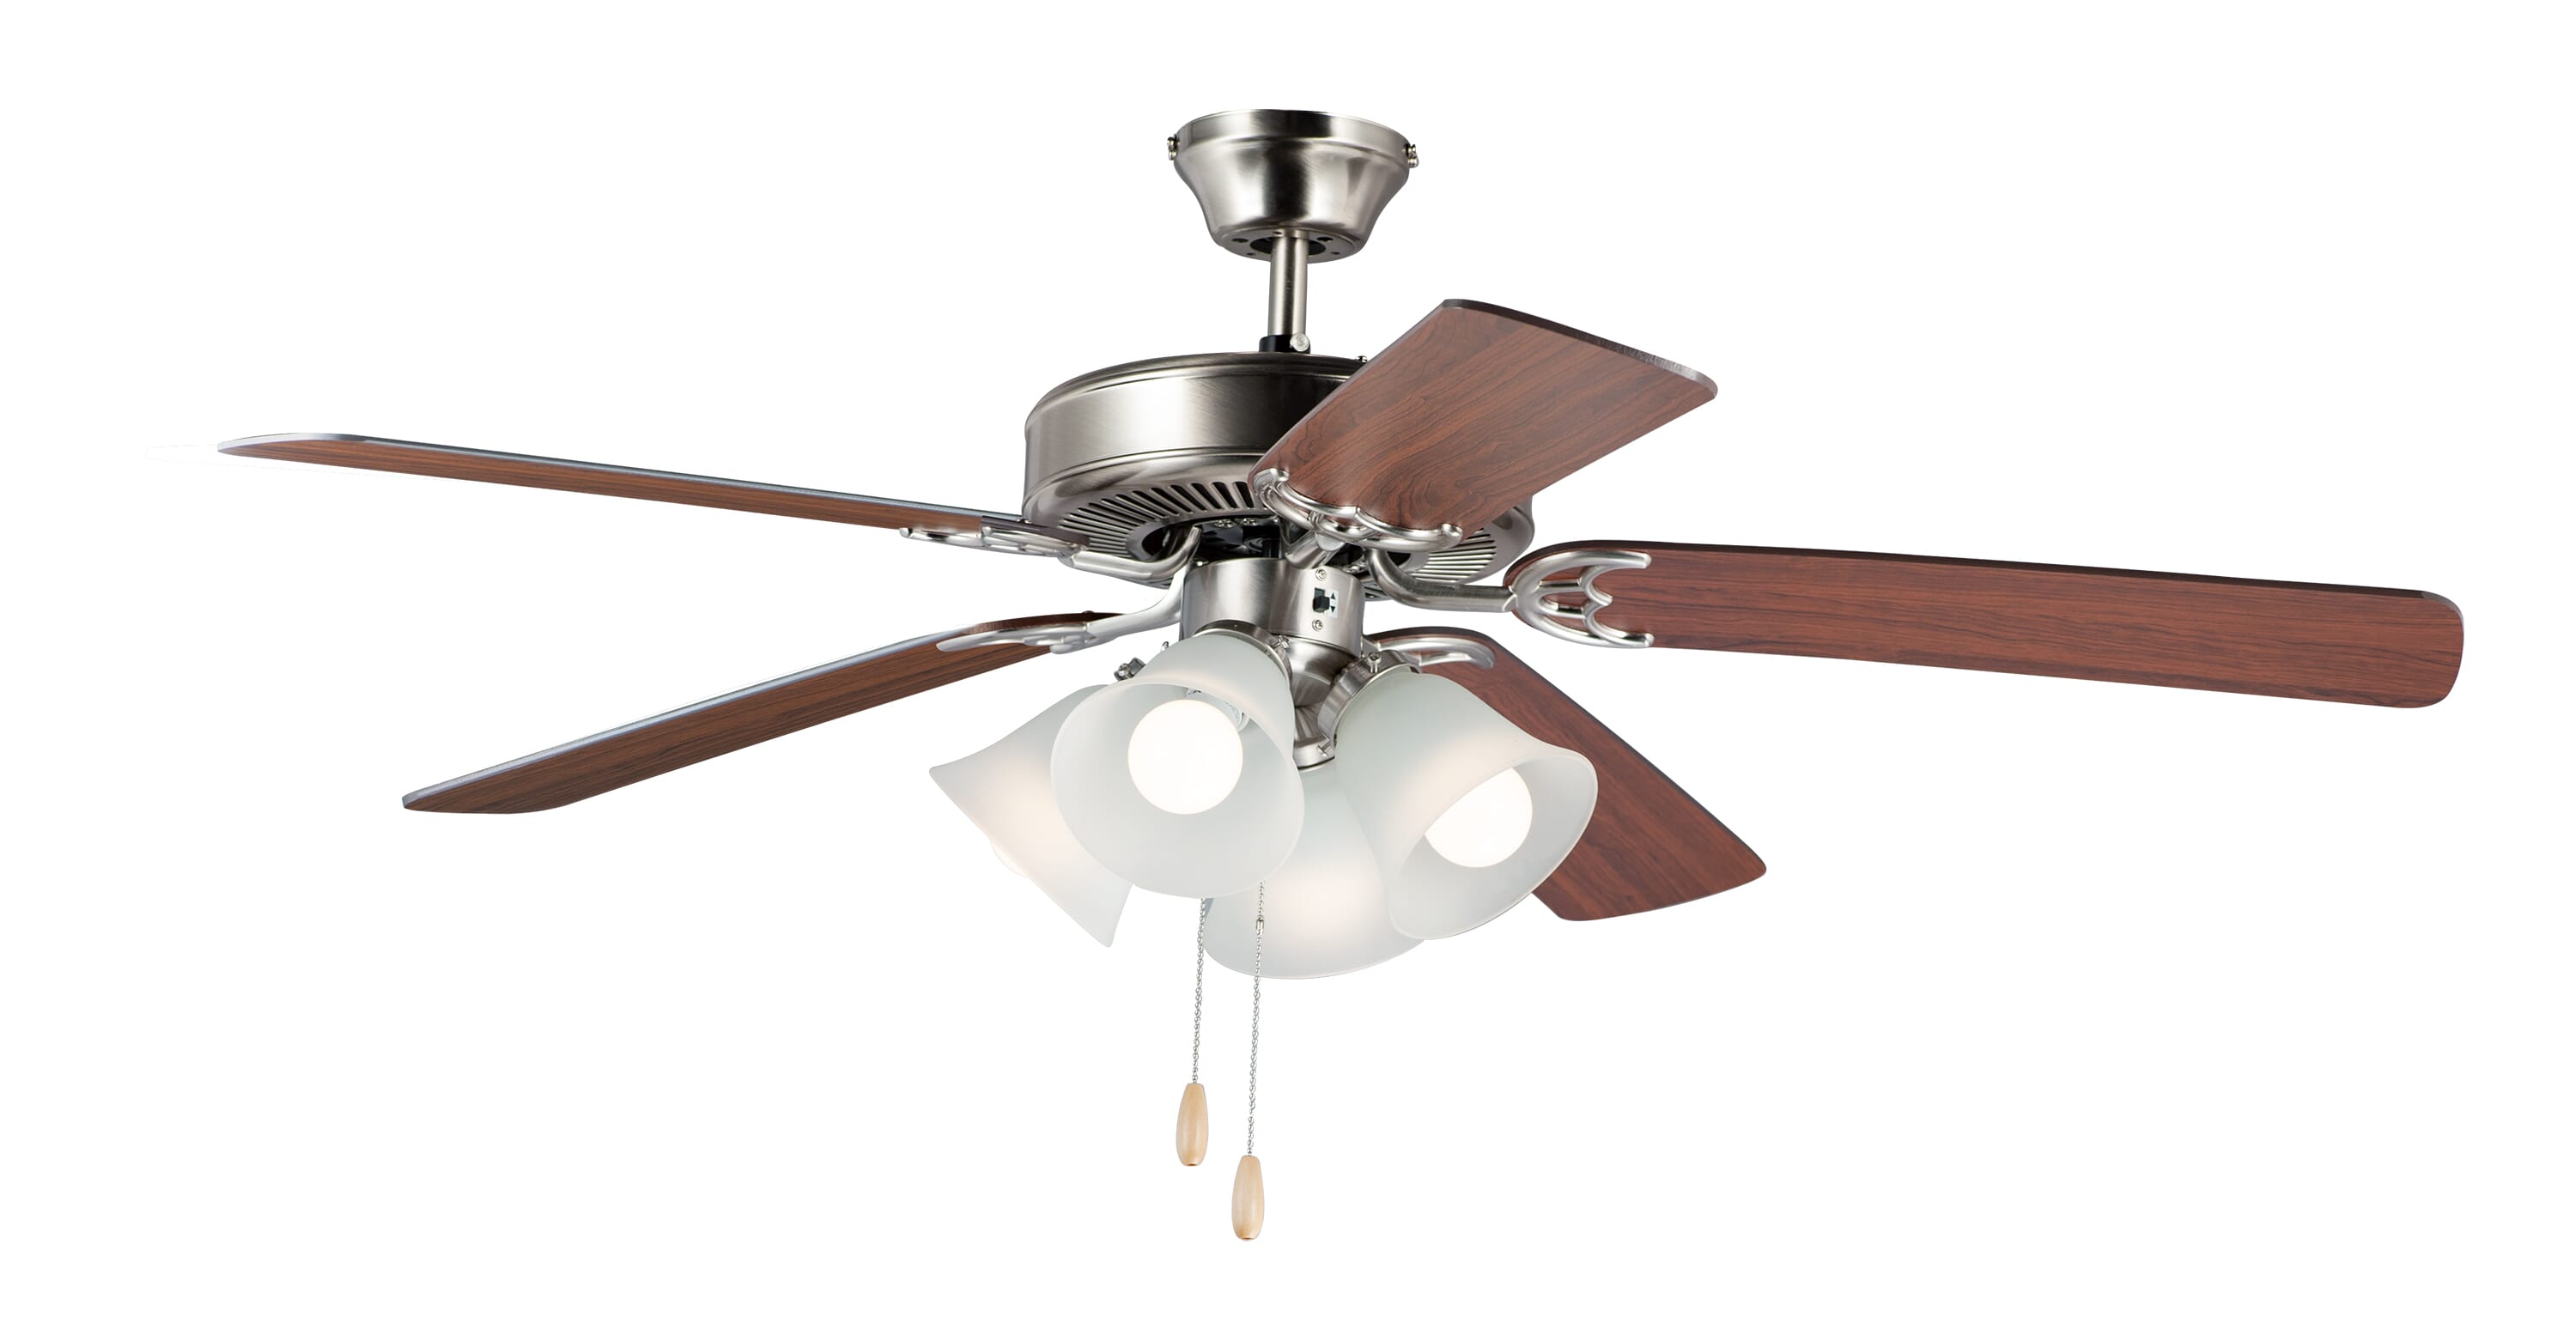 Maxim Transitional 4-Light 52"" Indoor Ceiling Fan in Satin Nickel and Walnut and Pecan - 89907FTSNWP -  Maxim Lighting